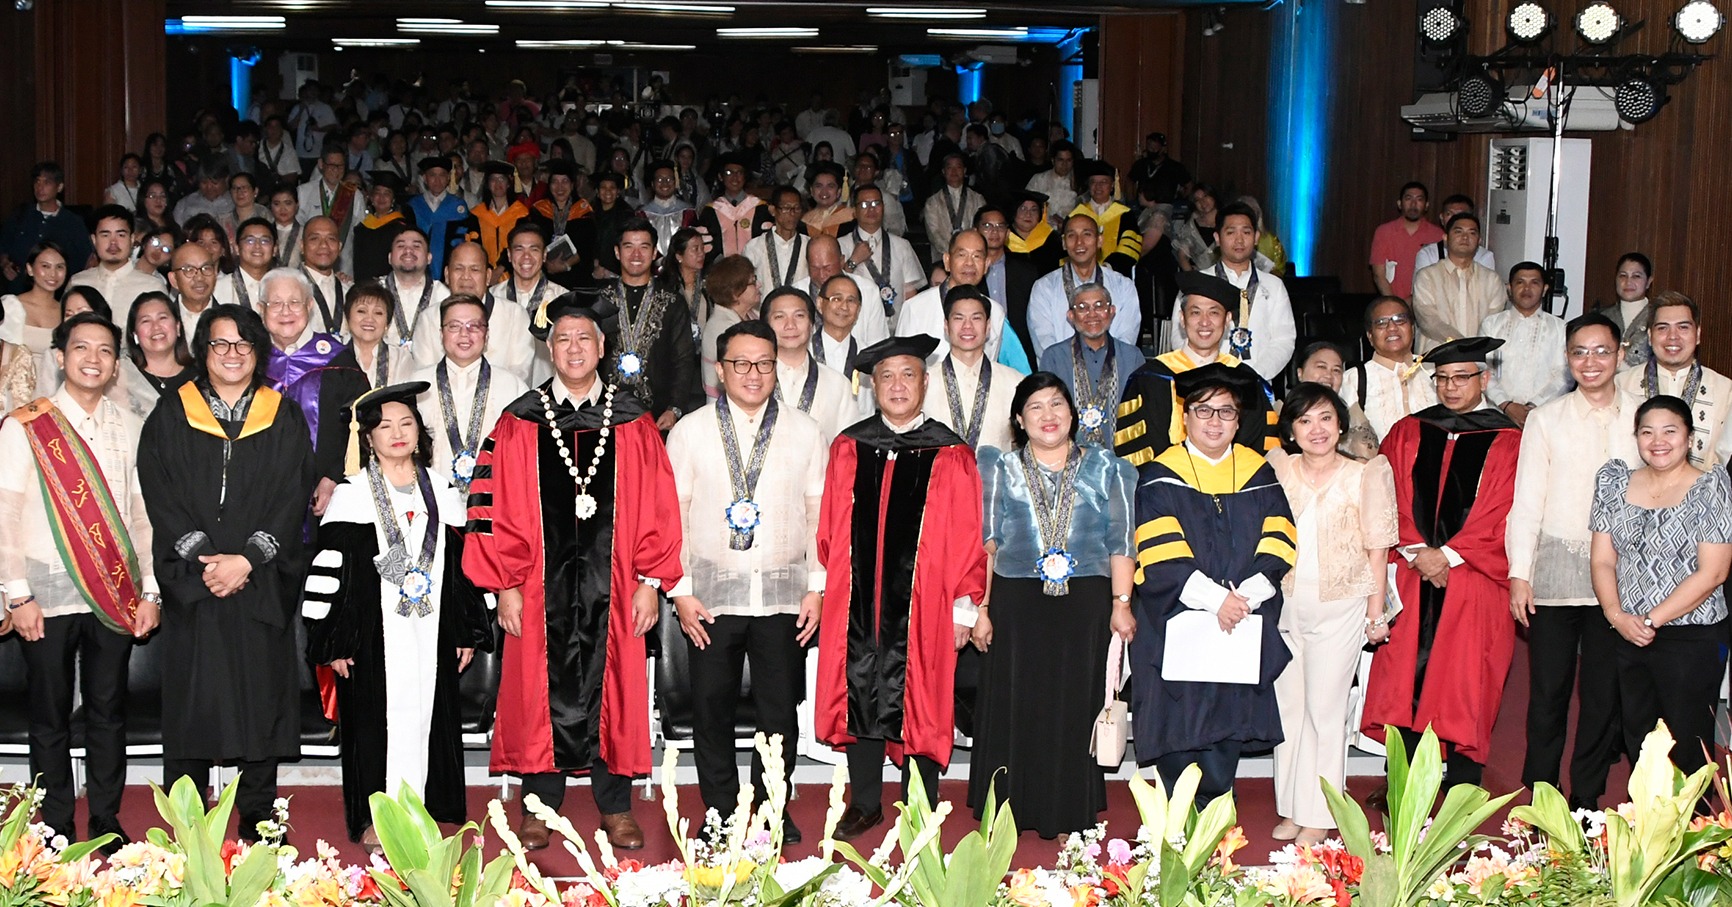 A joyous and memorable day,  filled with hope, for the PLM community as the 11th University President is installed